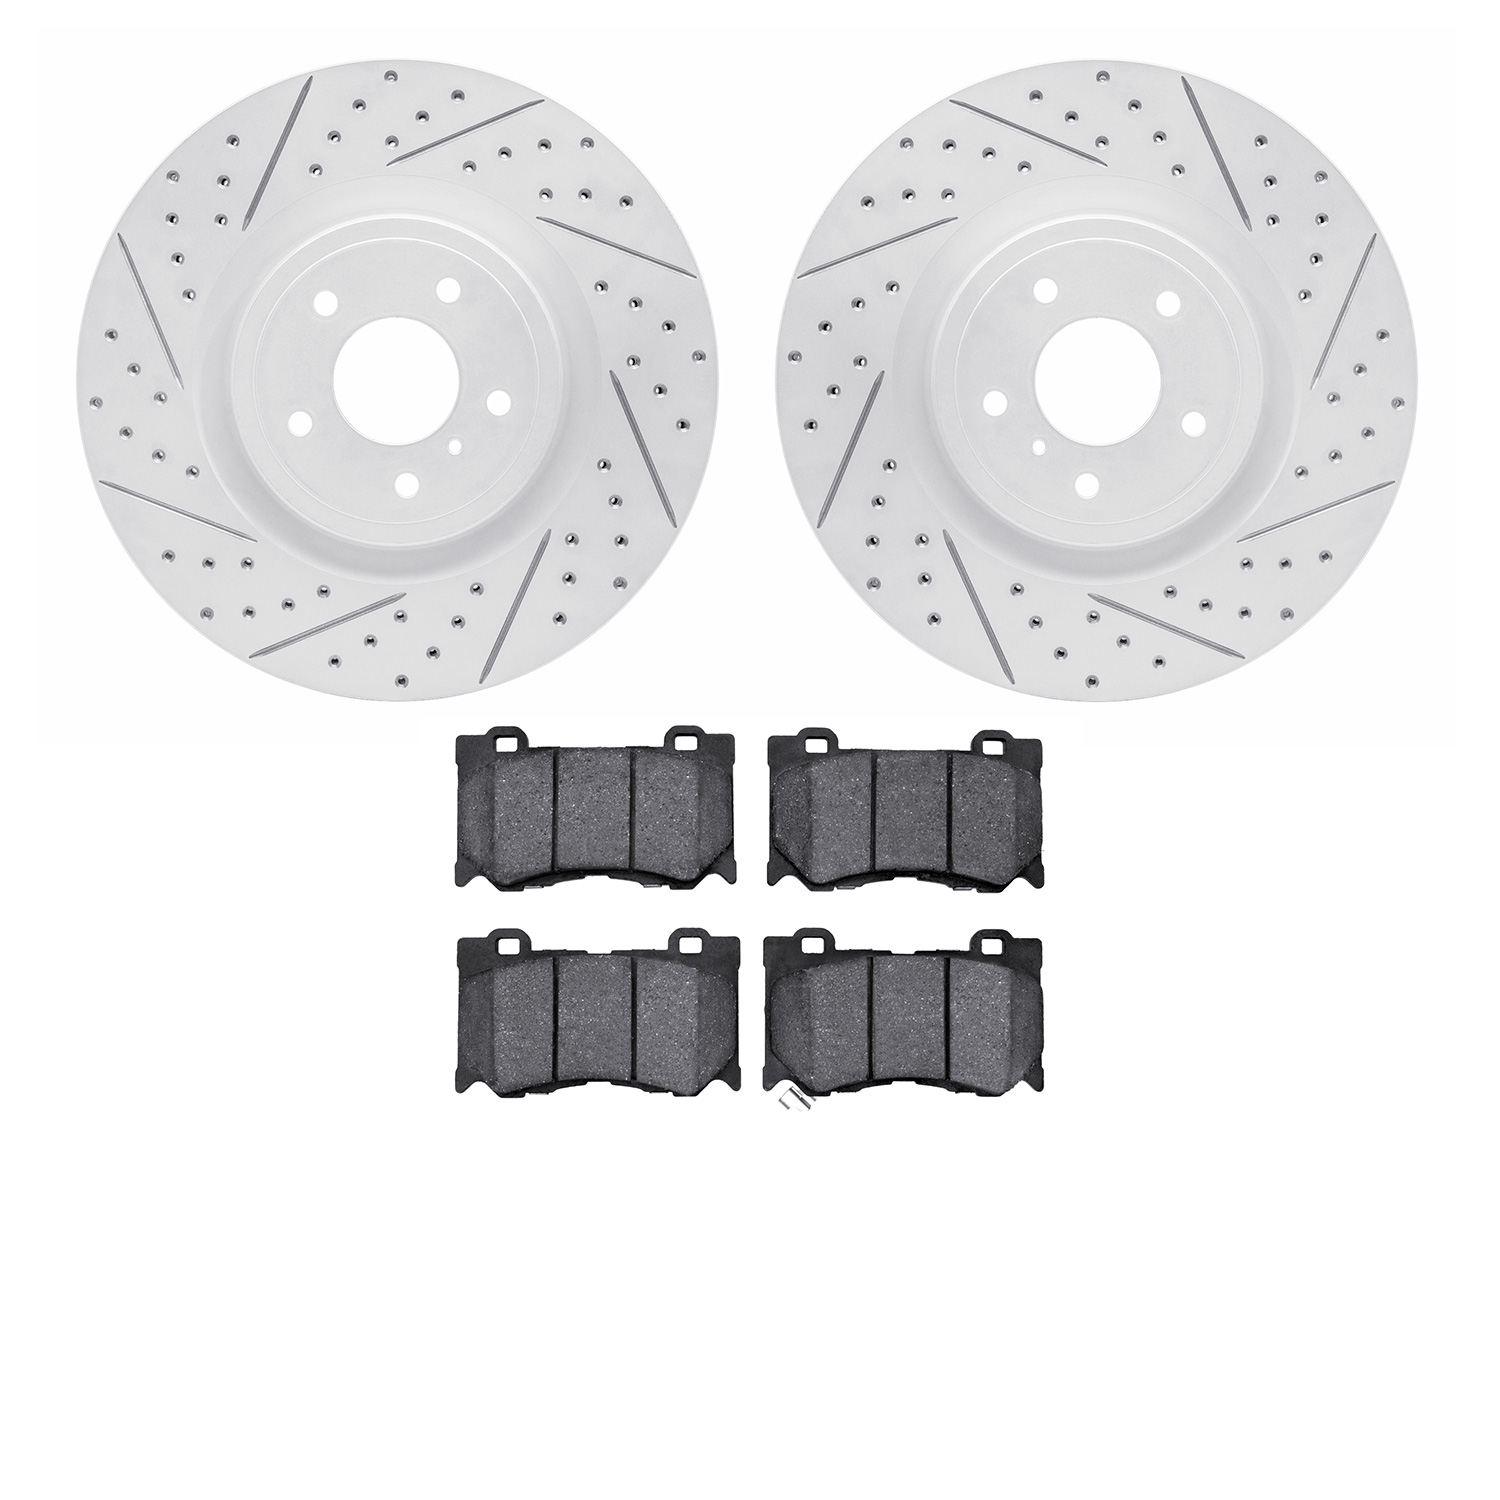 2502-68015 Geoperformance Drilled/Slotted Rotors w/5000 Advanced Brake Pads Kit, Fits Select Infiniti/Nissan, Position: Front